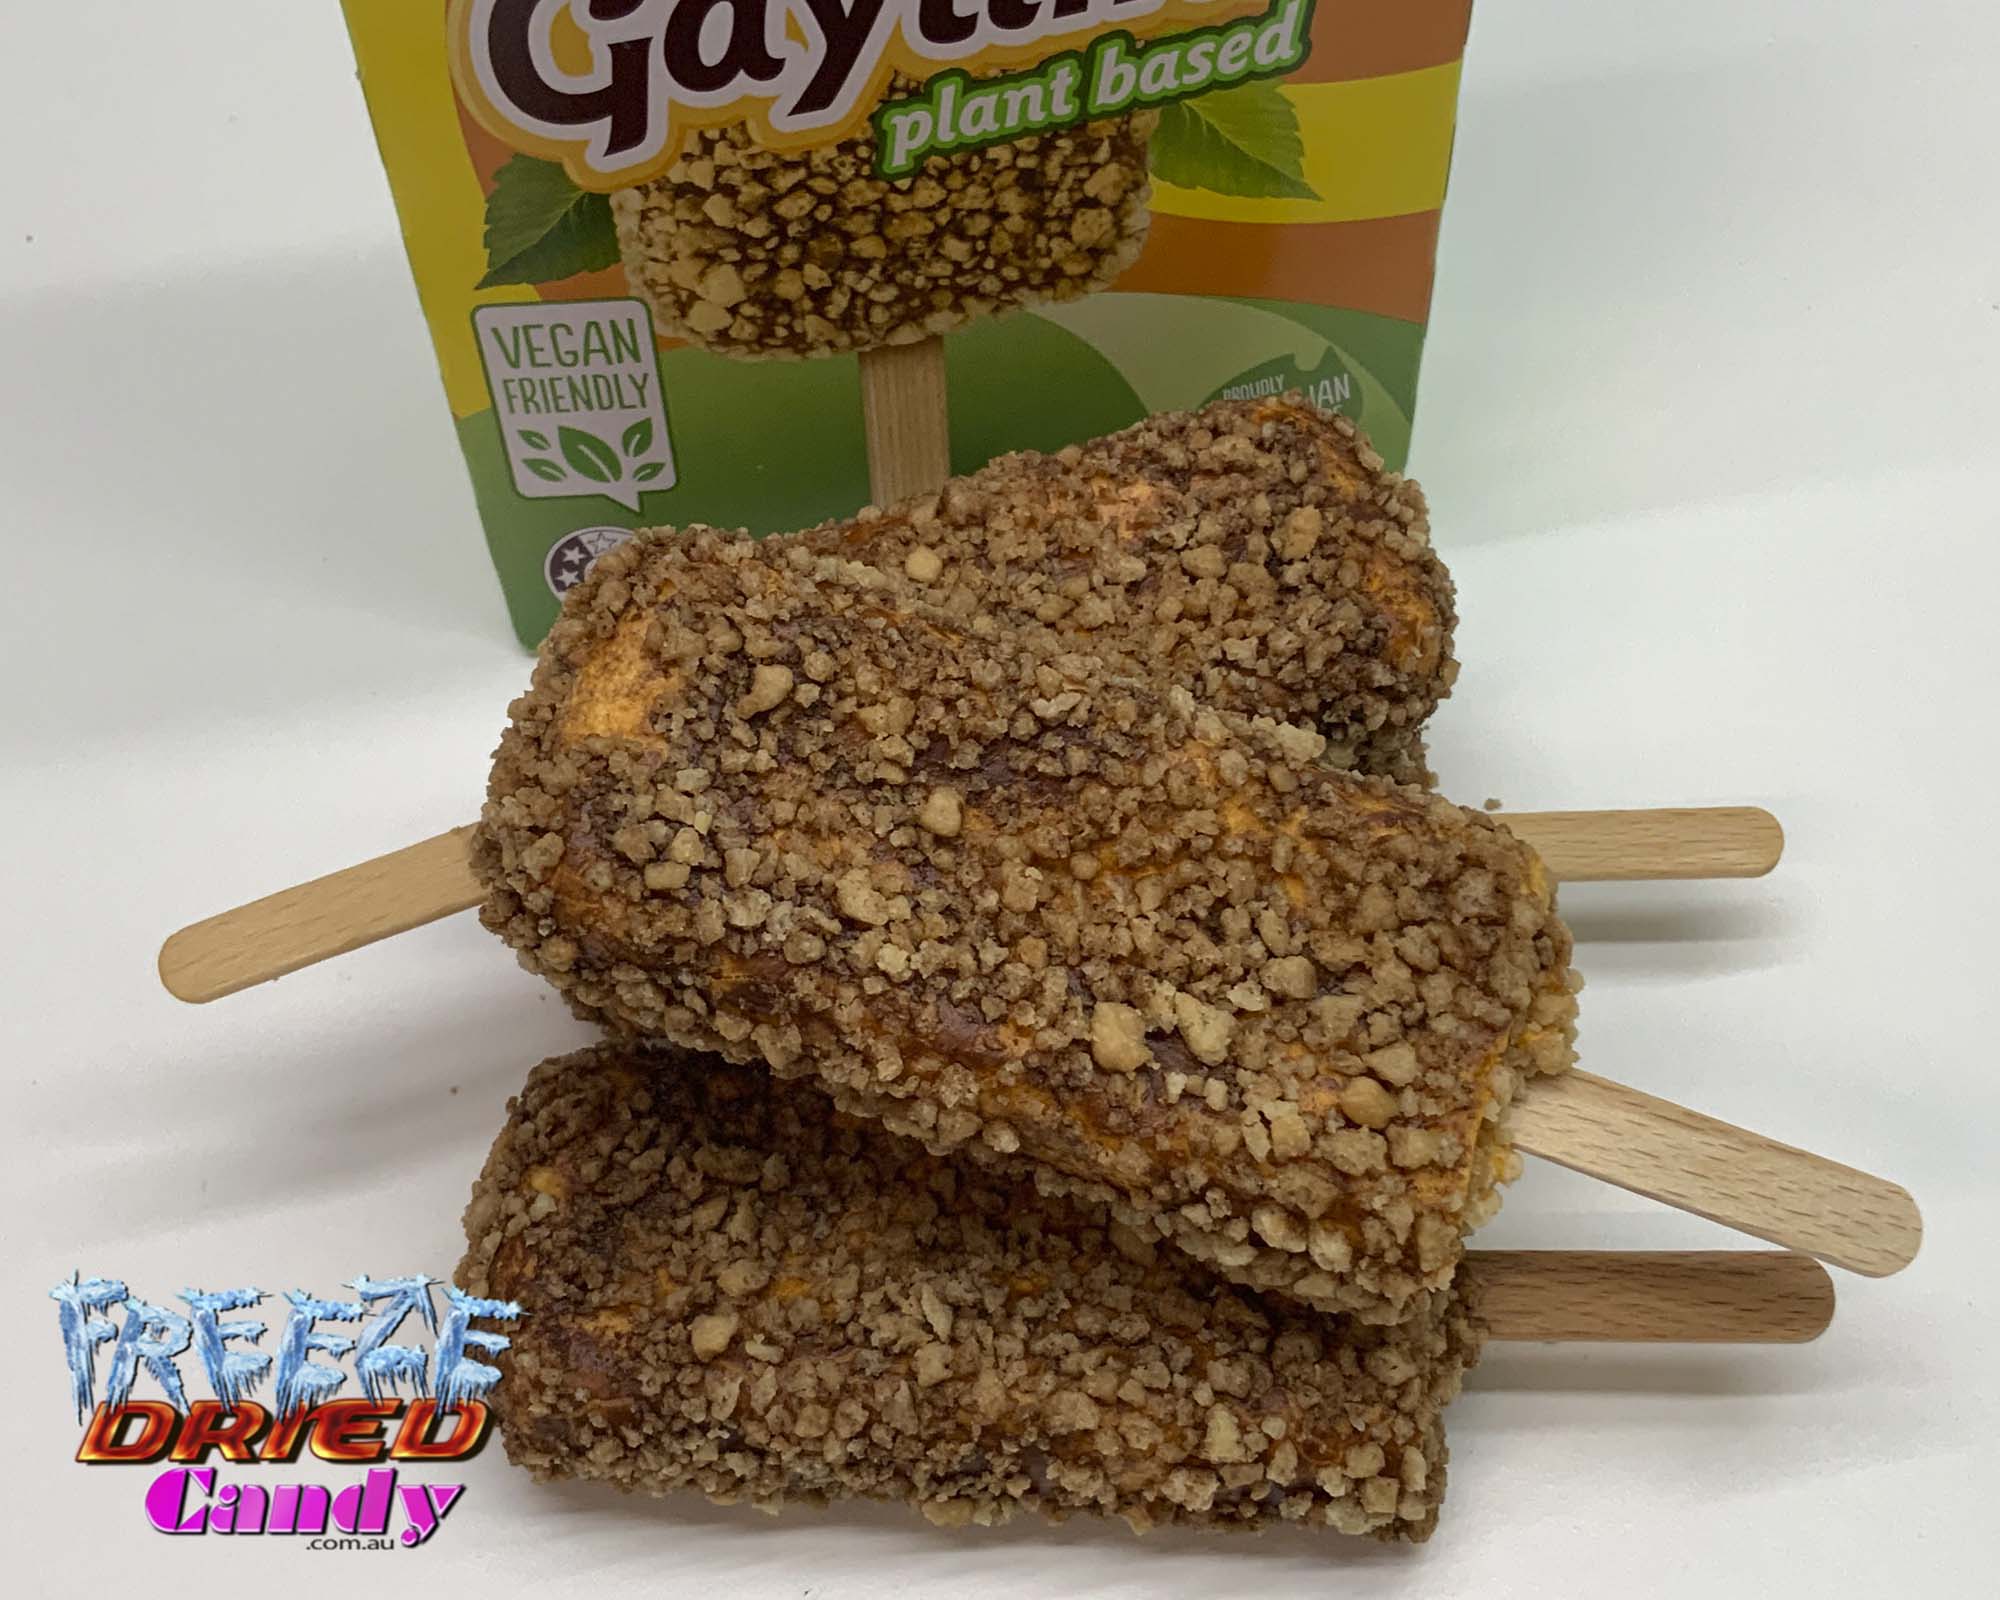 Freeze Dried Ice Cream Golden Gaytime Original Plant Based Vegan Freeze Dried Candy 